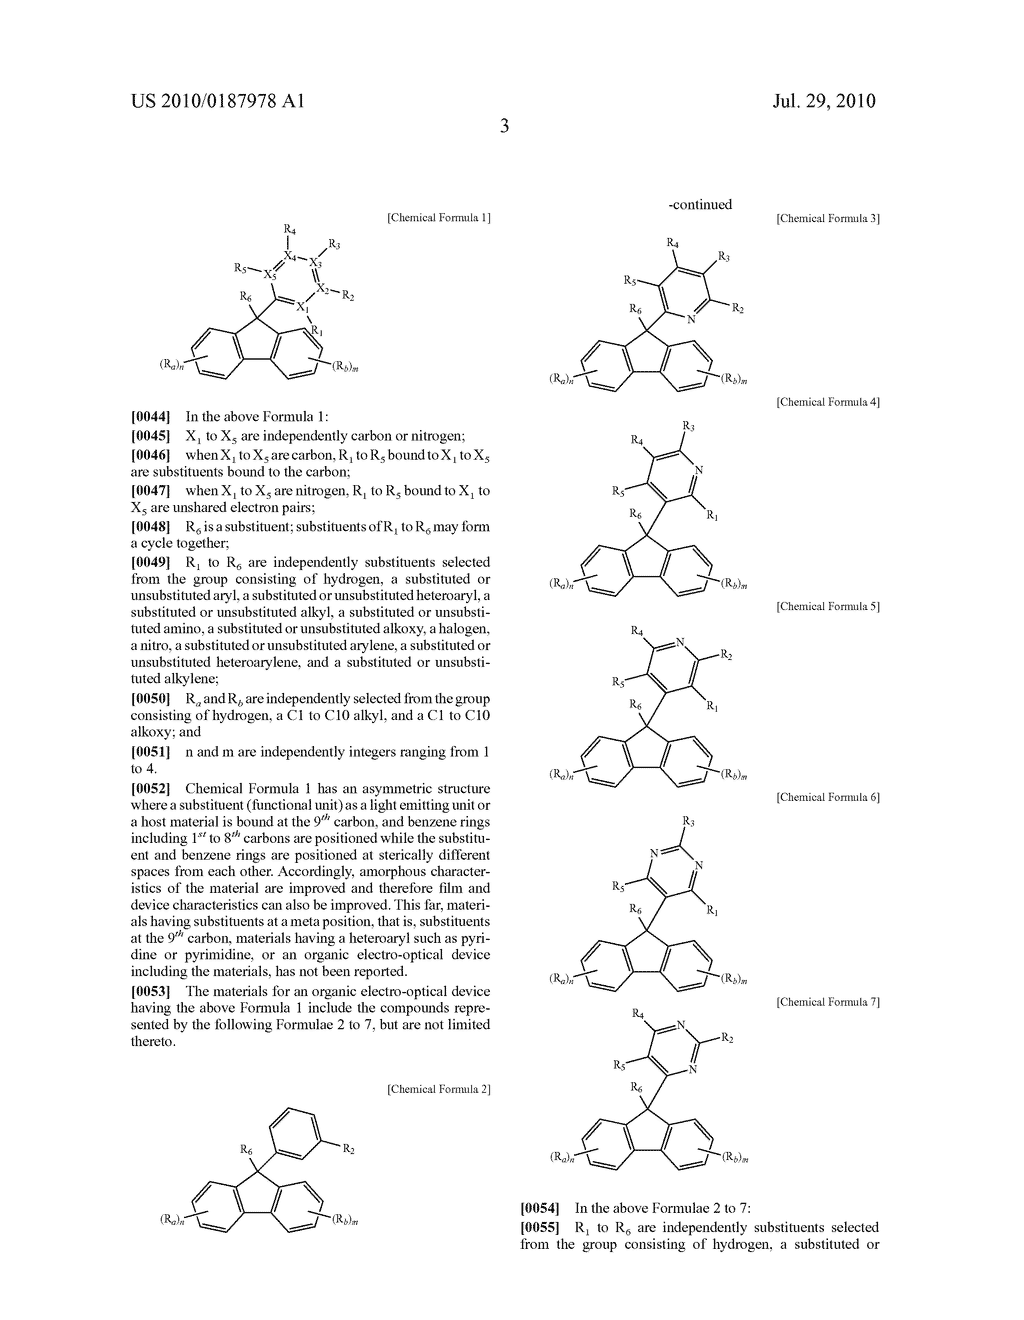 MATERIAL FOR ORGANIC ELECTRO-OPTICAL DEVICE HAVING FLUORENE DERIVATIVE COMPOUND AND ORGANIC ELECTRO-OPTICAL DEVICE INCLUDING THE SAME - diagram, schematic, and image 06